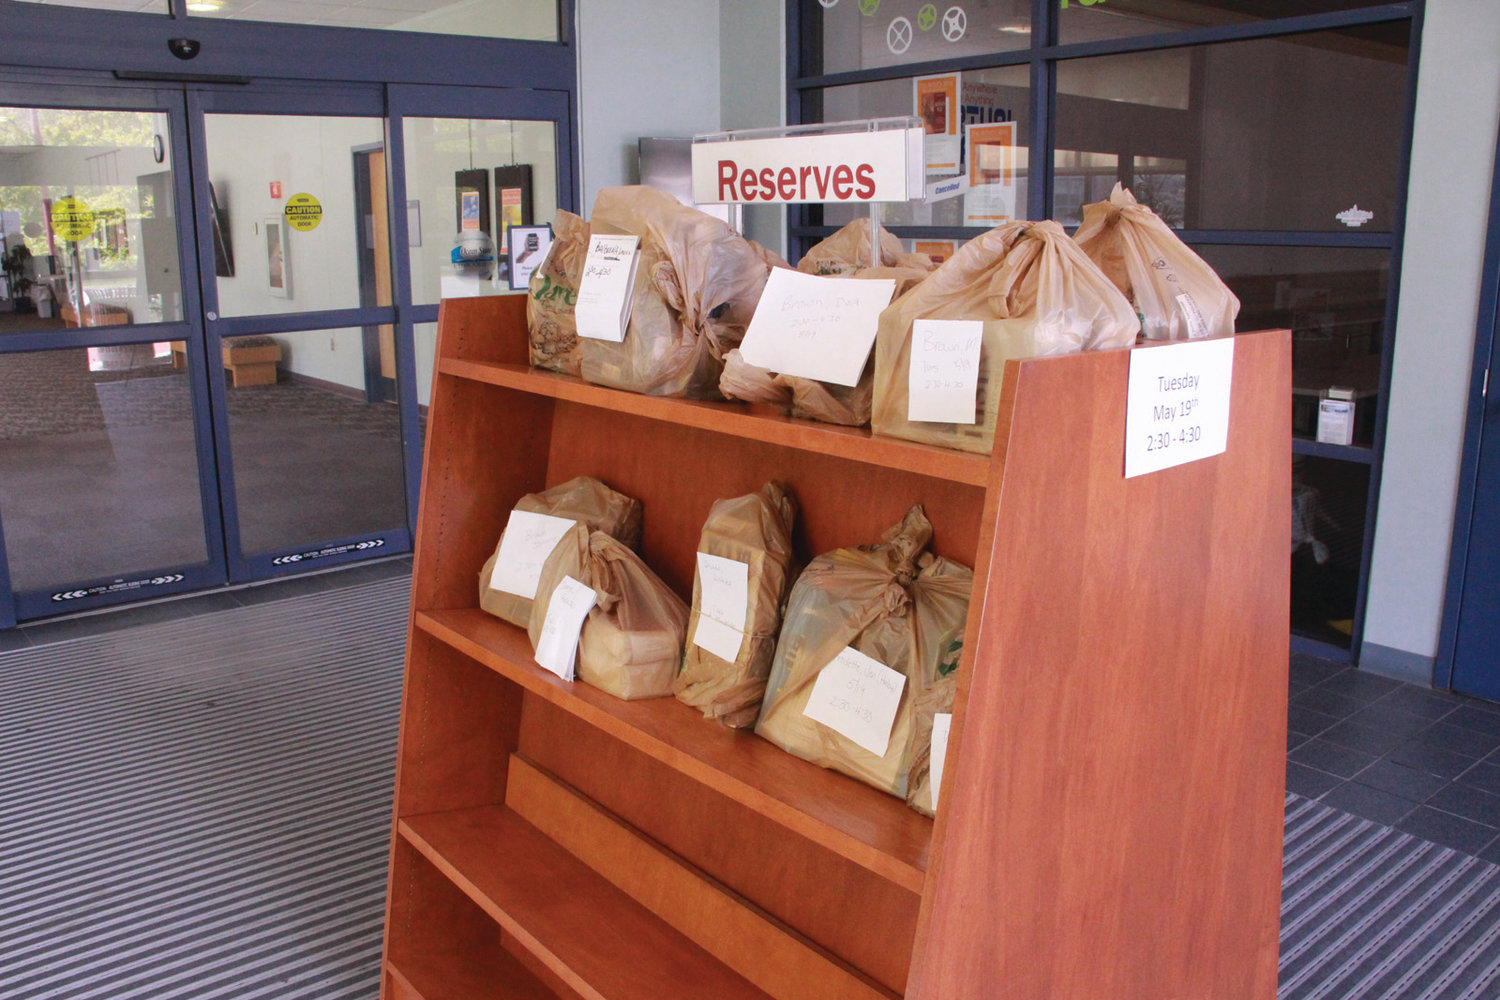 READY FOR PICKUP: Books and other materials are bagged with the name of the recipient waiting for pickup just inside the main doorway to the Warwick Public Library.